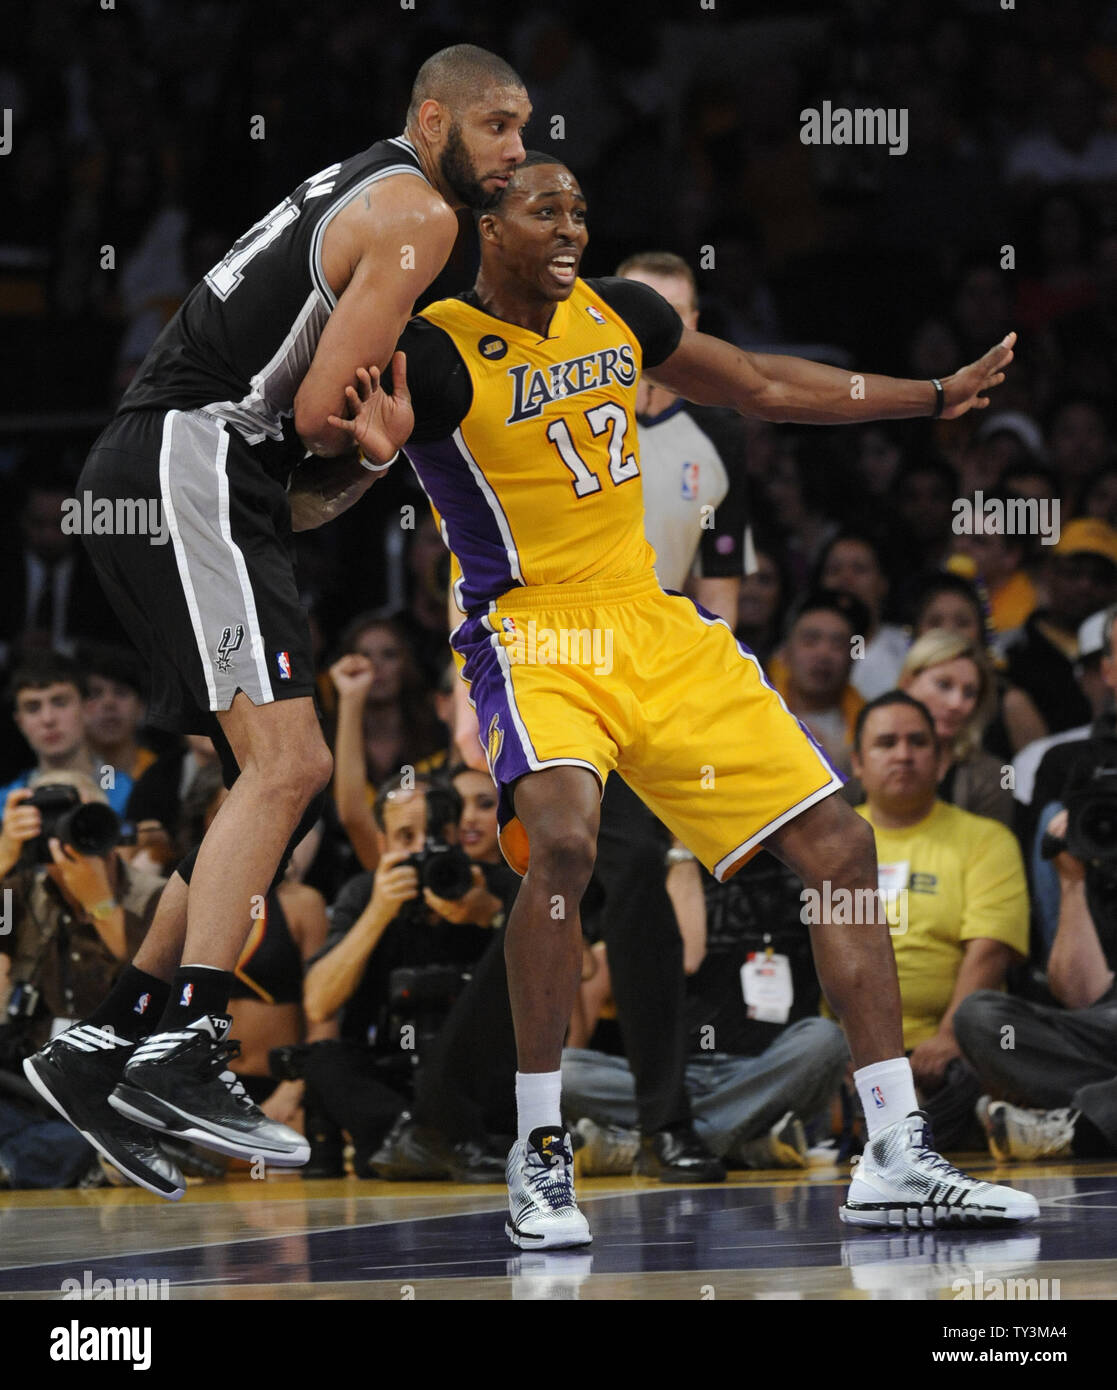 San Antonio Spurs power forward Tim Duncan (21) and Los Angeles Lakers center Dwight Howard (12) battle for position during the second half of game 3 of the Western Conference Playoffs at Staples Center in Los Angeles on April 26, 2013. The Spurs won 120 to 89. UPI /Lori Shepler Stock Photo